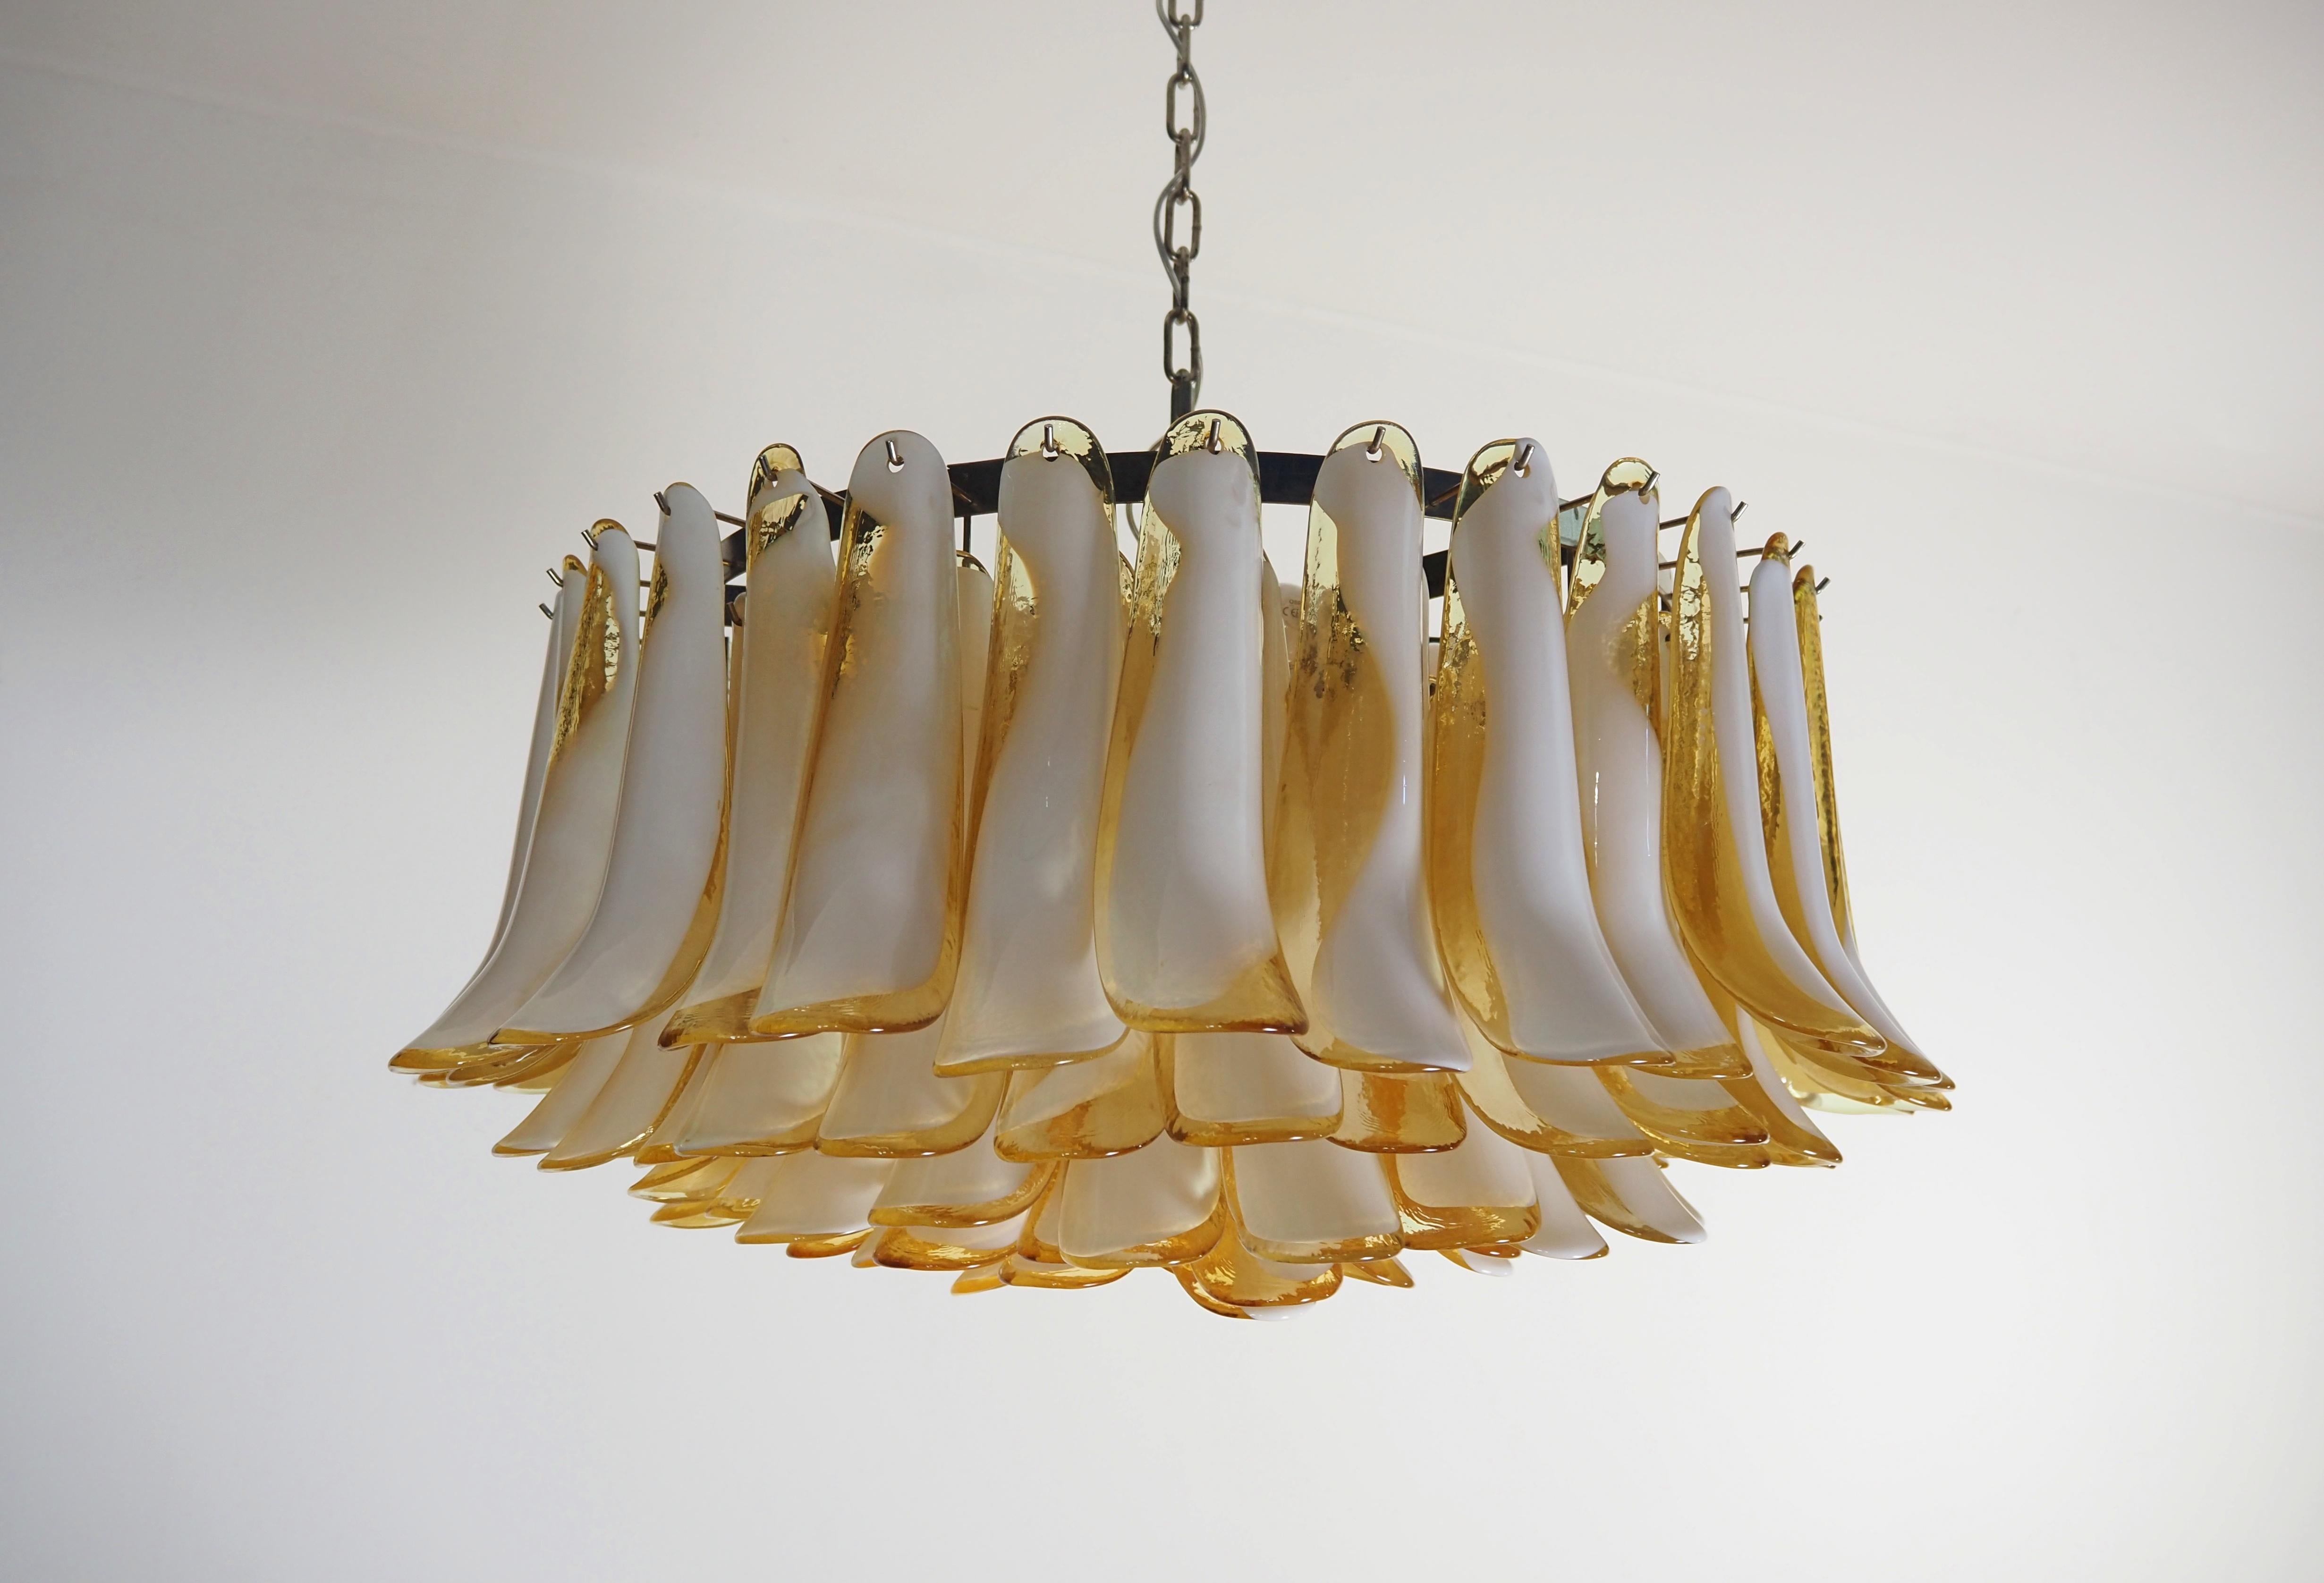 Italian vintage chandelier in Murano glass and nickel plated metal structure. The armor polished nickel supports 101 glass petals (caramel and white 